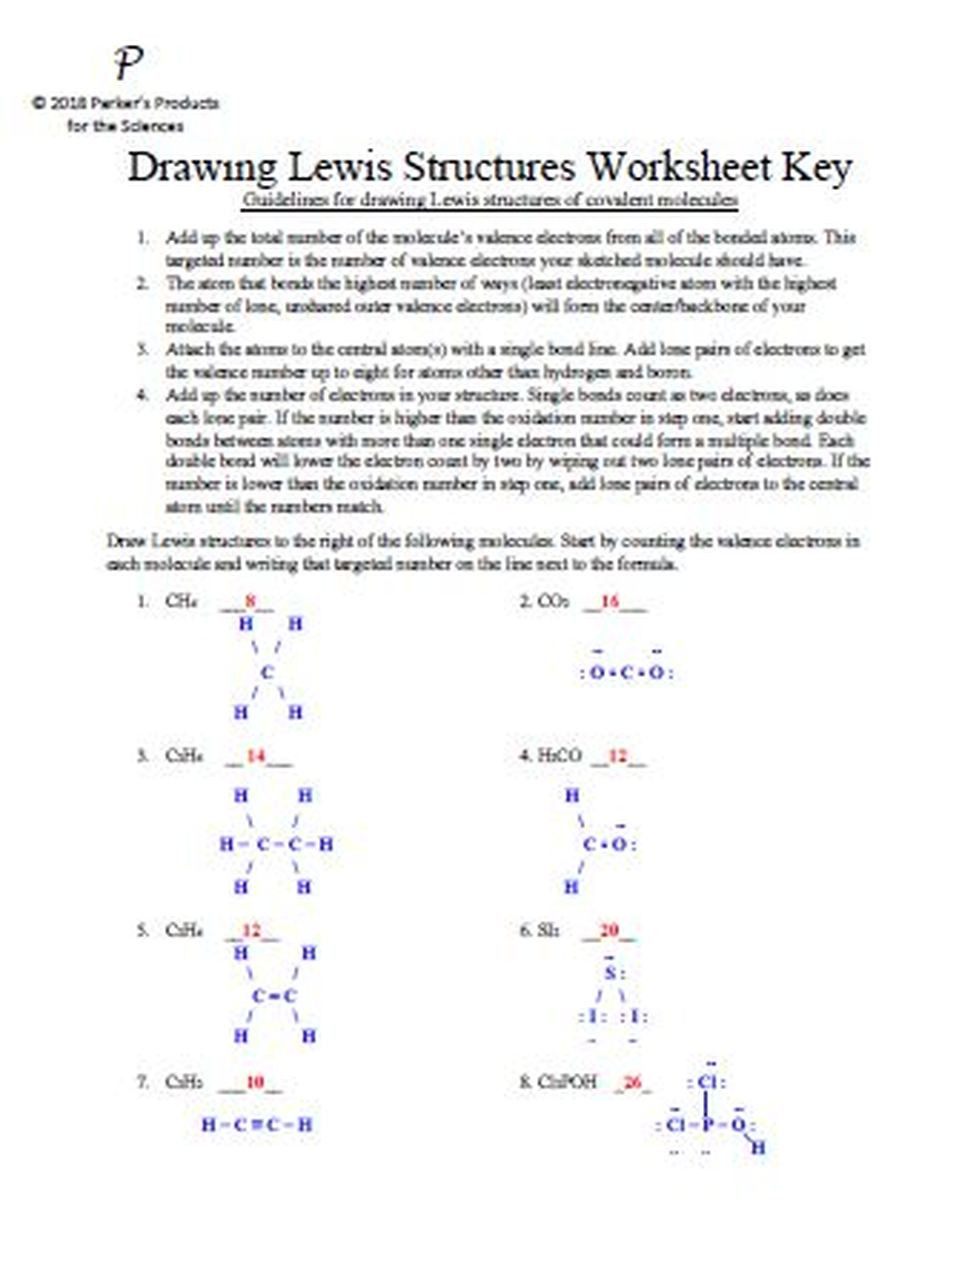 Lewis Structure Worksheet with Answers Drawing Lewis Structures Worksheet